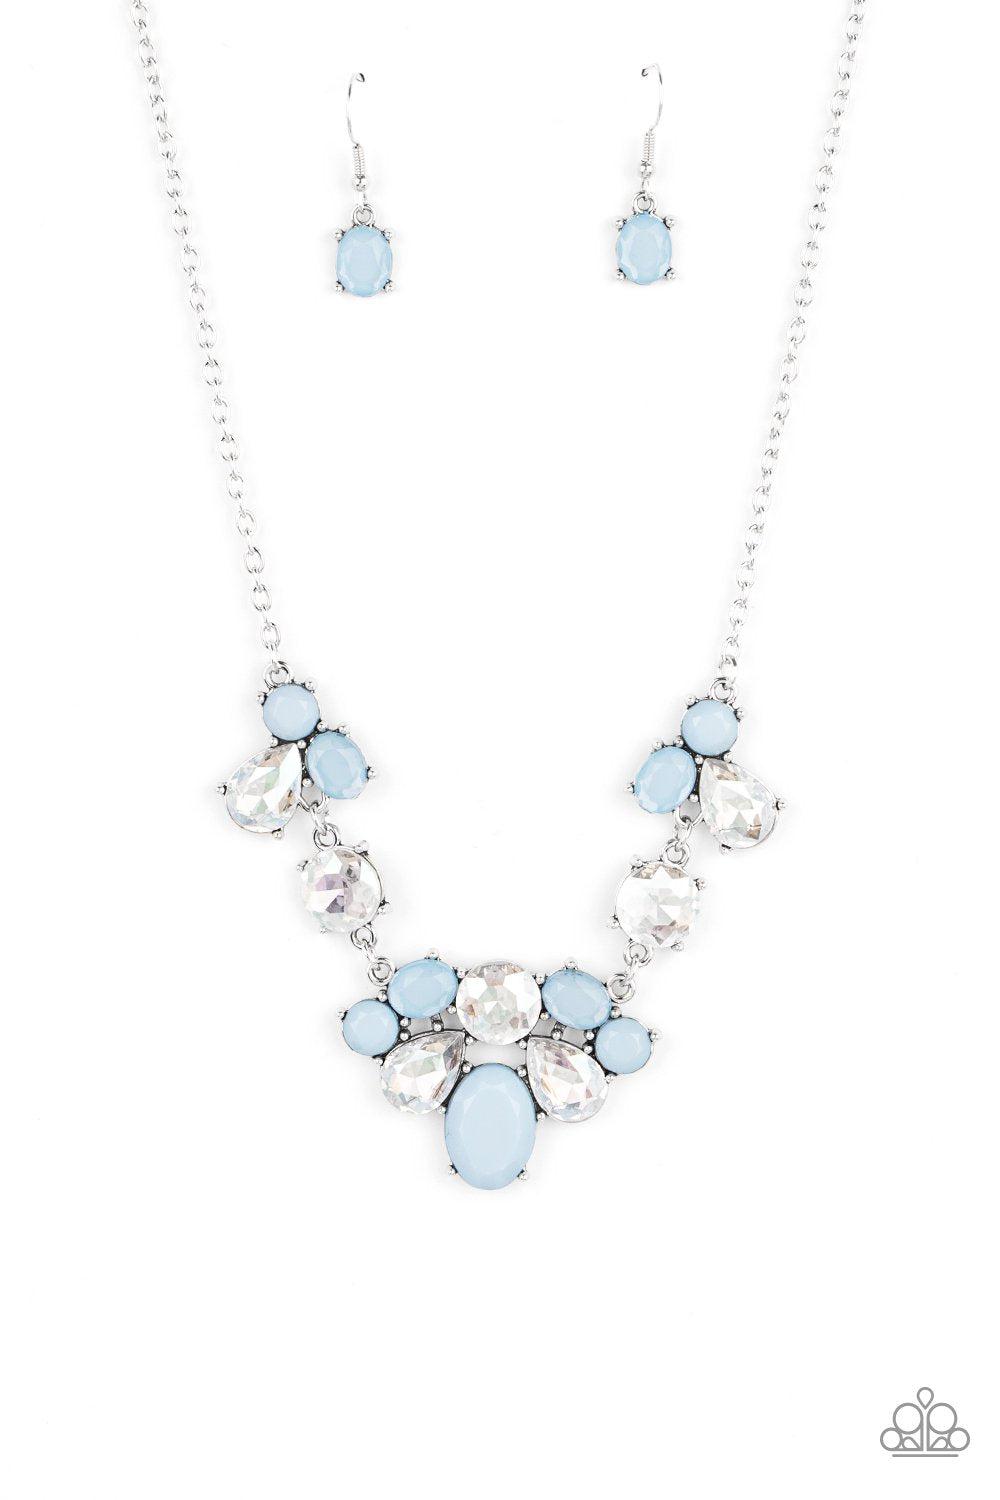 Ethereal Romance Blue and White Rhinestone Necklace - Paparazzi Accessories- lightbox - CarasShop.com - $5 Jewelry by Cara Jewels